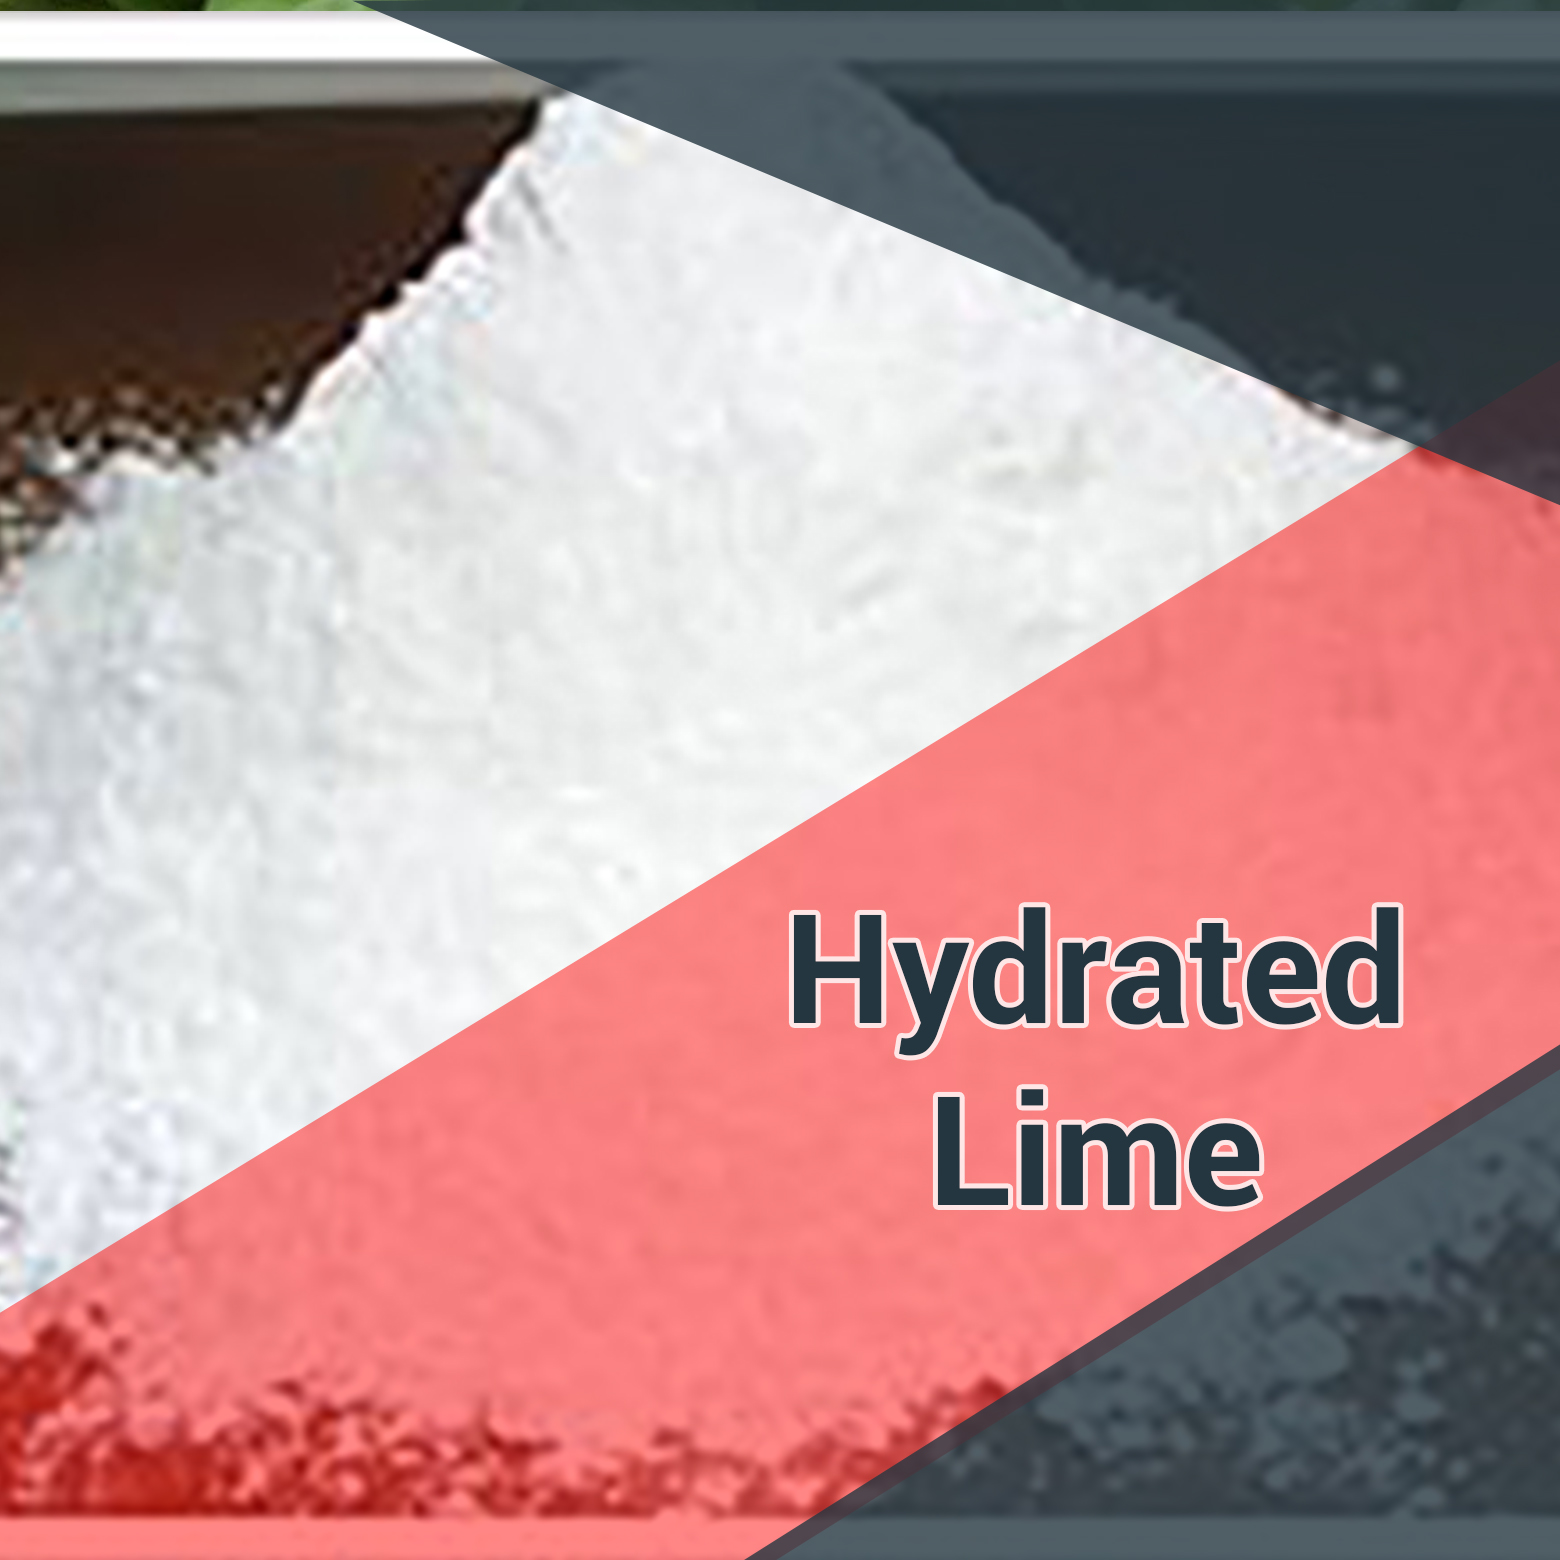 Hydrated Lime Suppliers